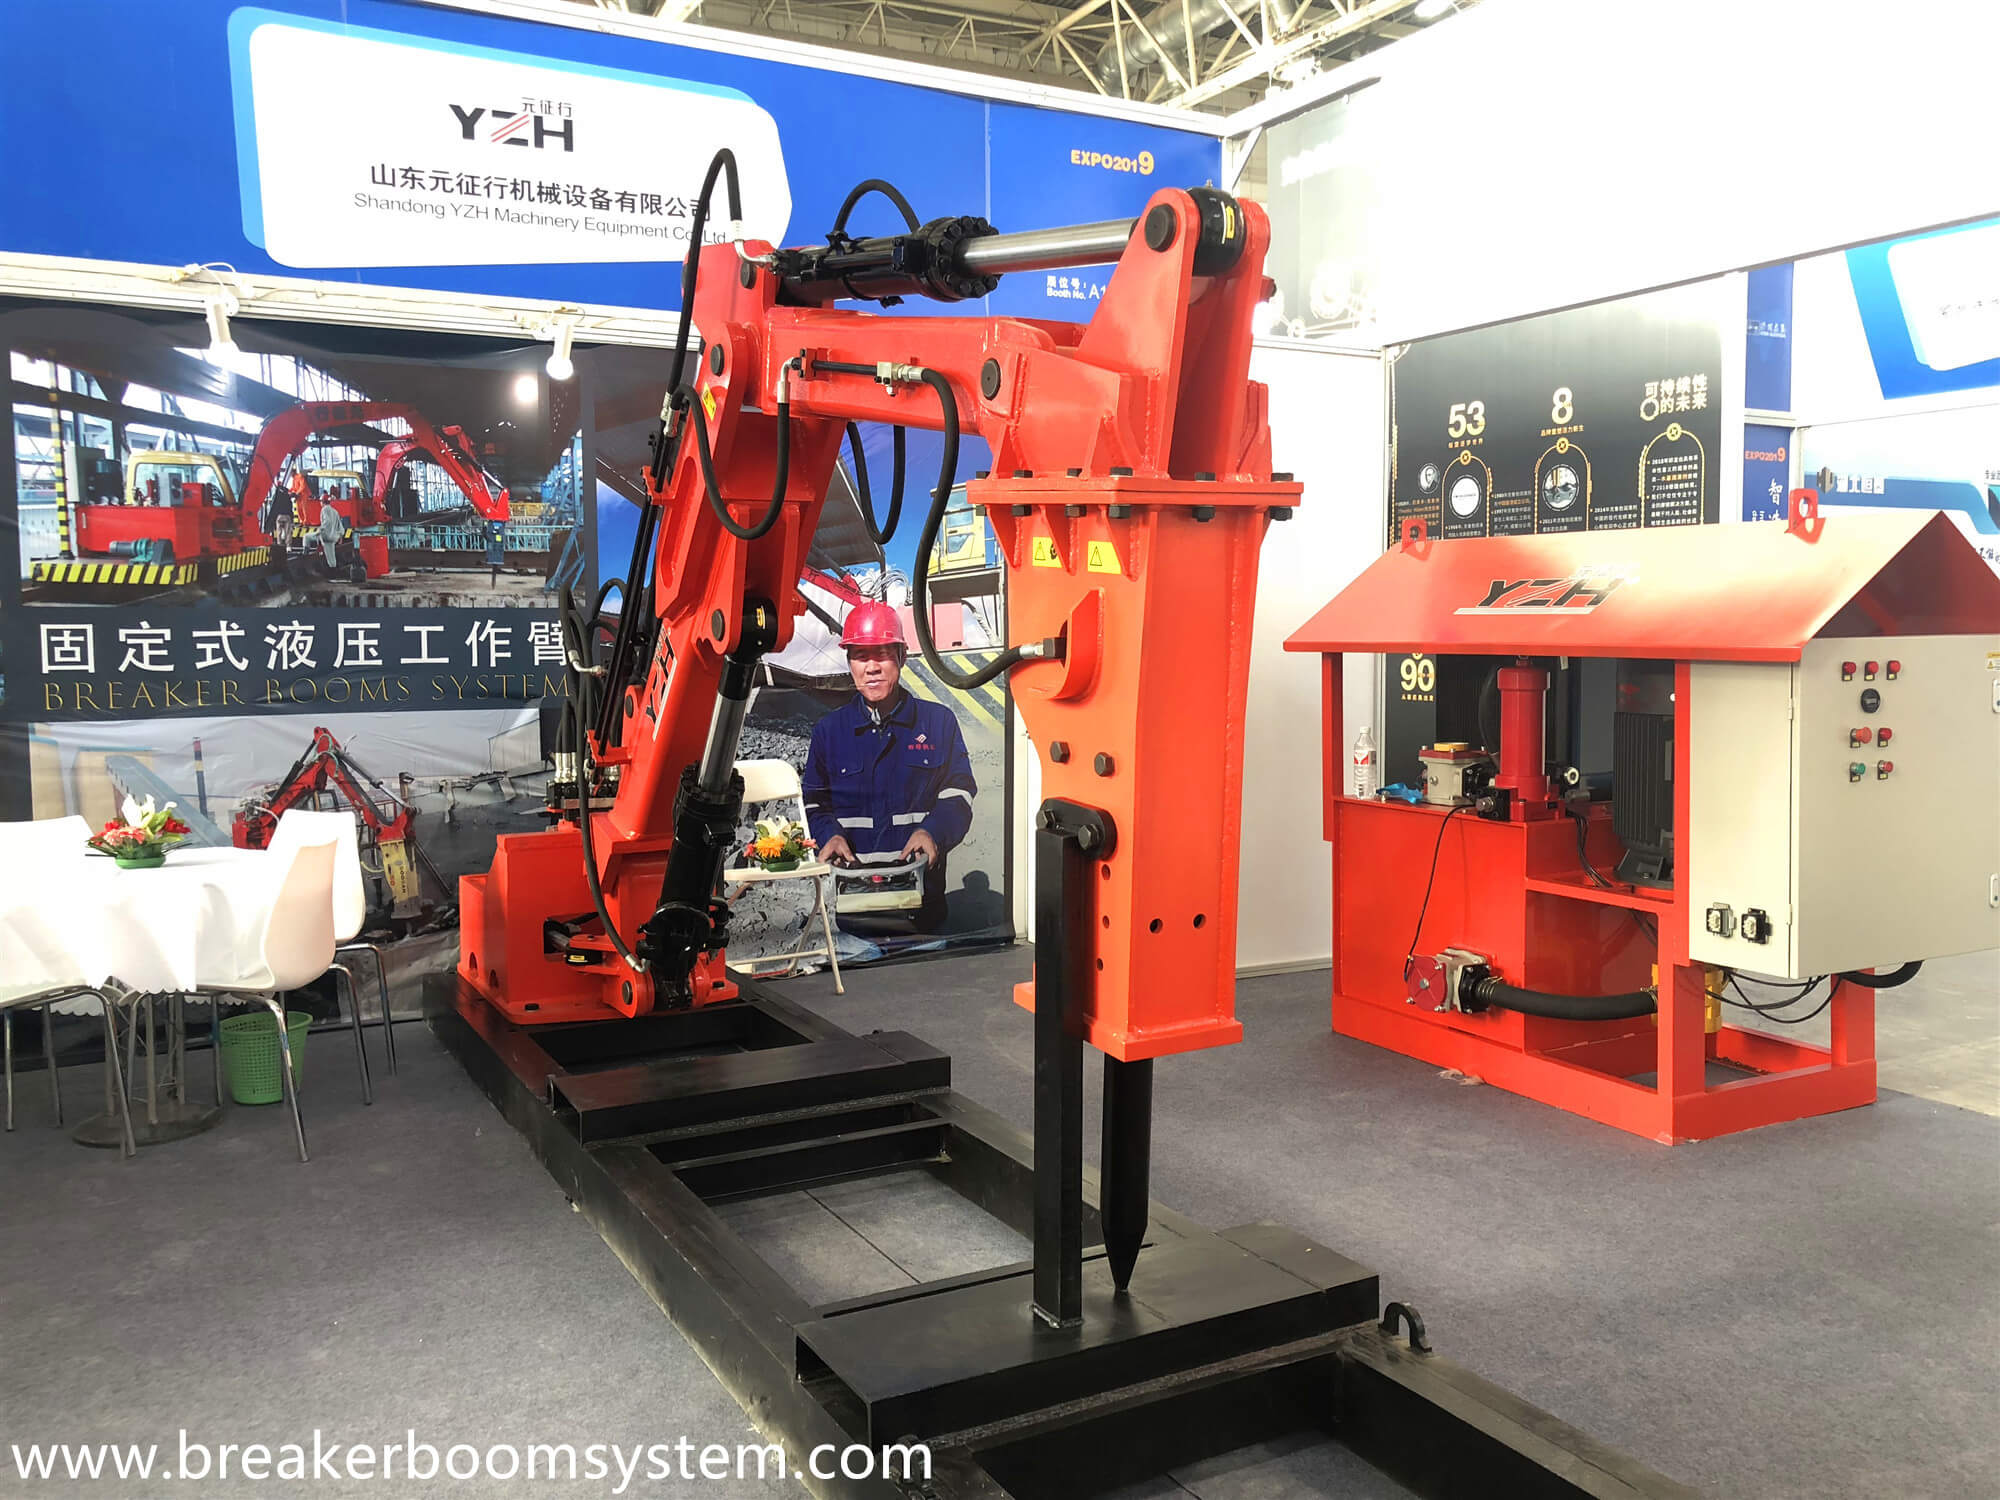 Pedestal Breaker Booms System of The YZH Brand Got Much Attention During CIME 2019